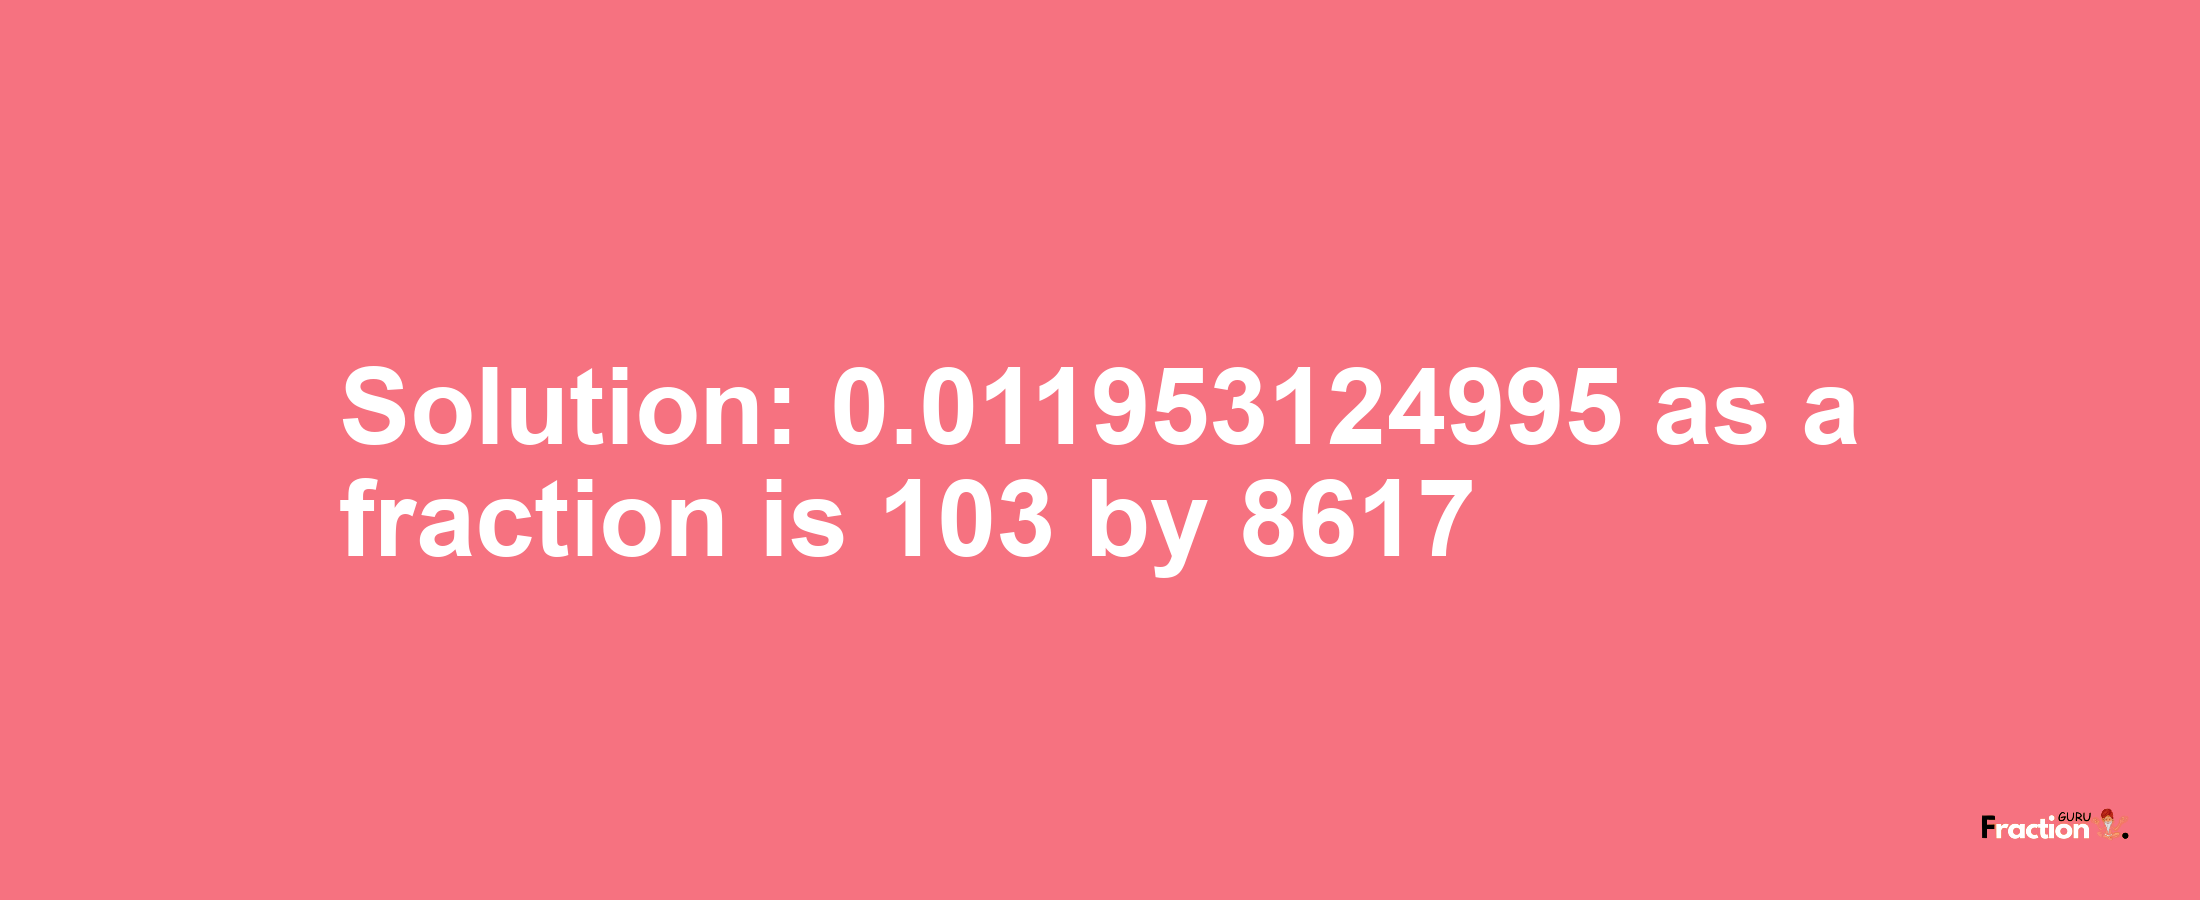 Solution:0.011953124995 as a fraction is 103/8617